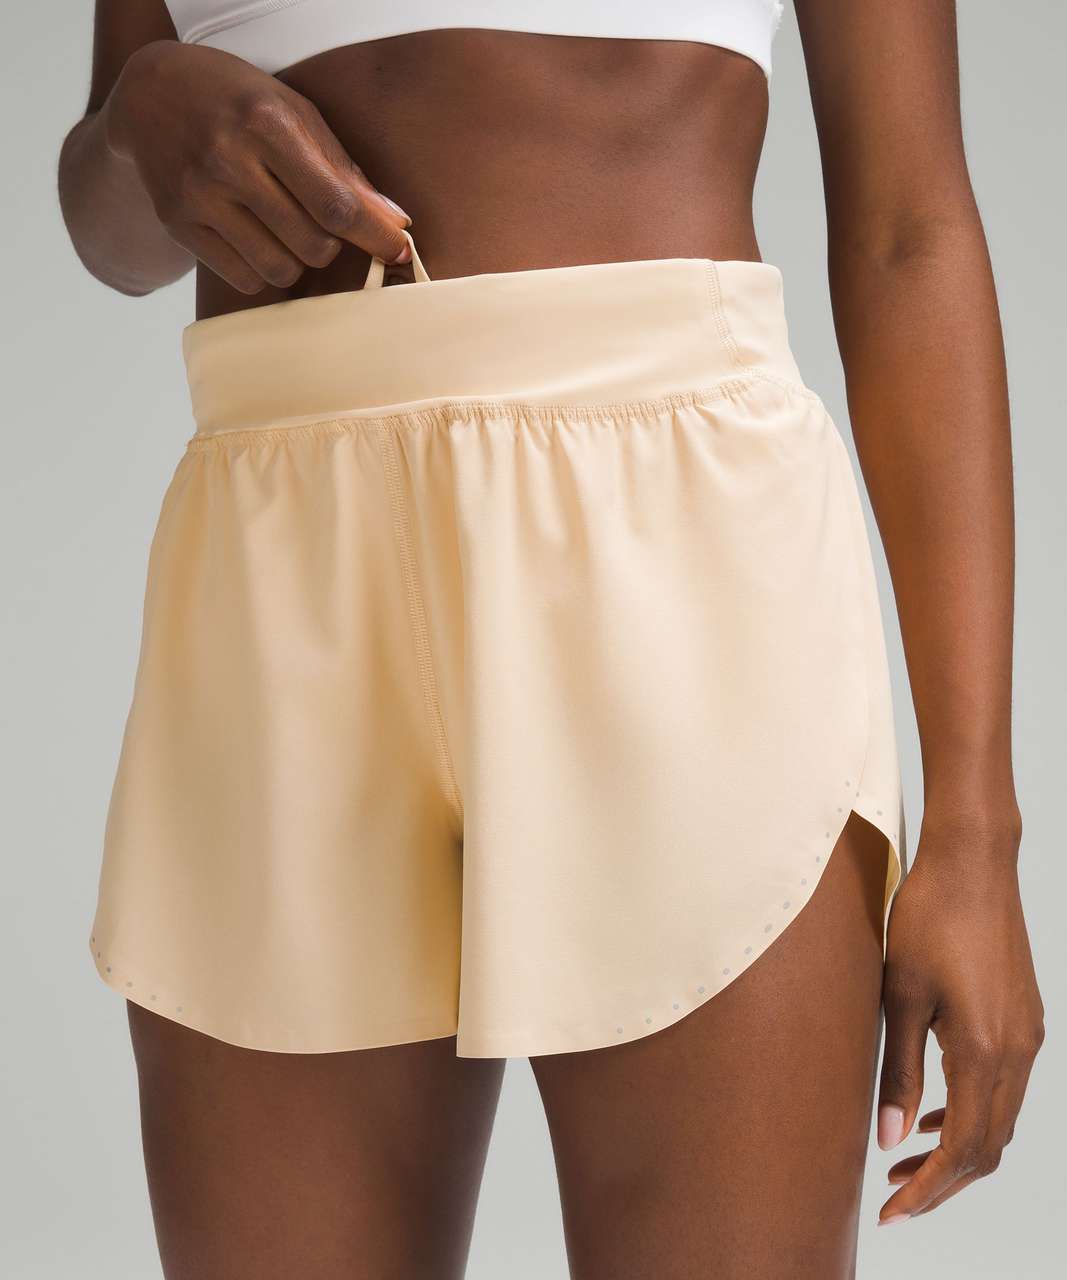 Lululemon Fast and Free Reflective High-Rise Classic-Fit Short 3" - Summer Glow